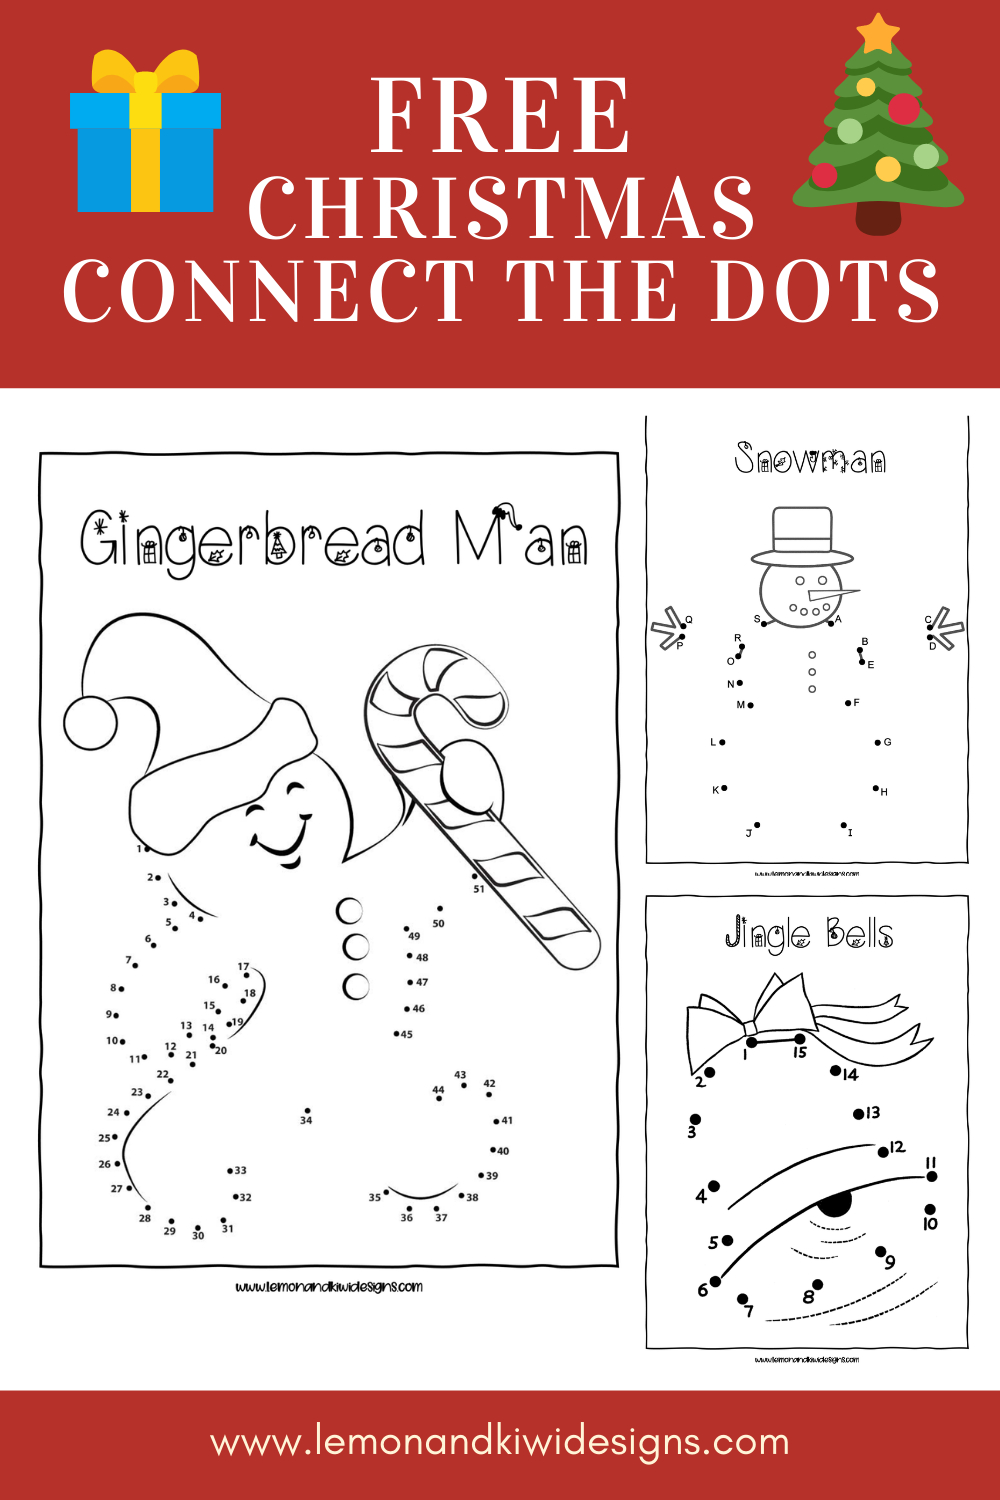 Free Christmas Connect The Dots Worksheets inside Free Christmas Connect The Dots Worksheets Printable